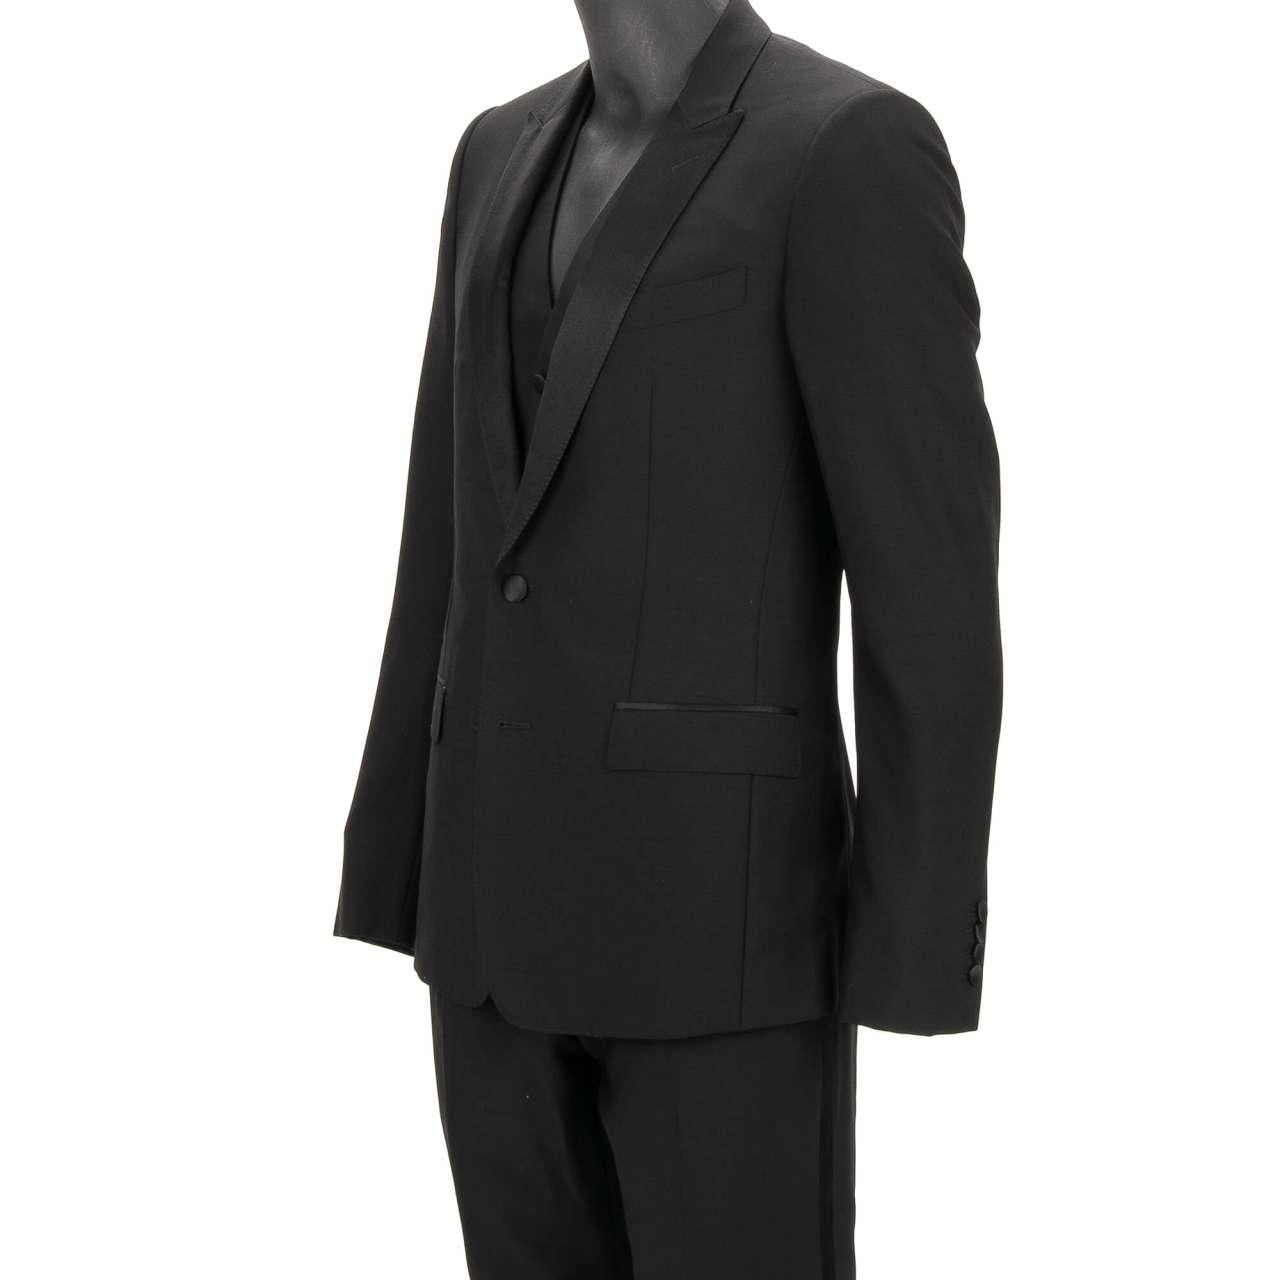 - Virgin wool 3 piece suit, jacket, waistcoat, pants with shawl silk lapel in black by DOLCE & GABBANA - MARTINI Model - RUNWAY - Dolce & Gabbana Fashion Show - New with tag - MADE in ITALY - Slim Fit - Model: GK2WMT-FU2Z8-N0000 - Material: 87%